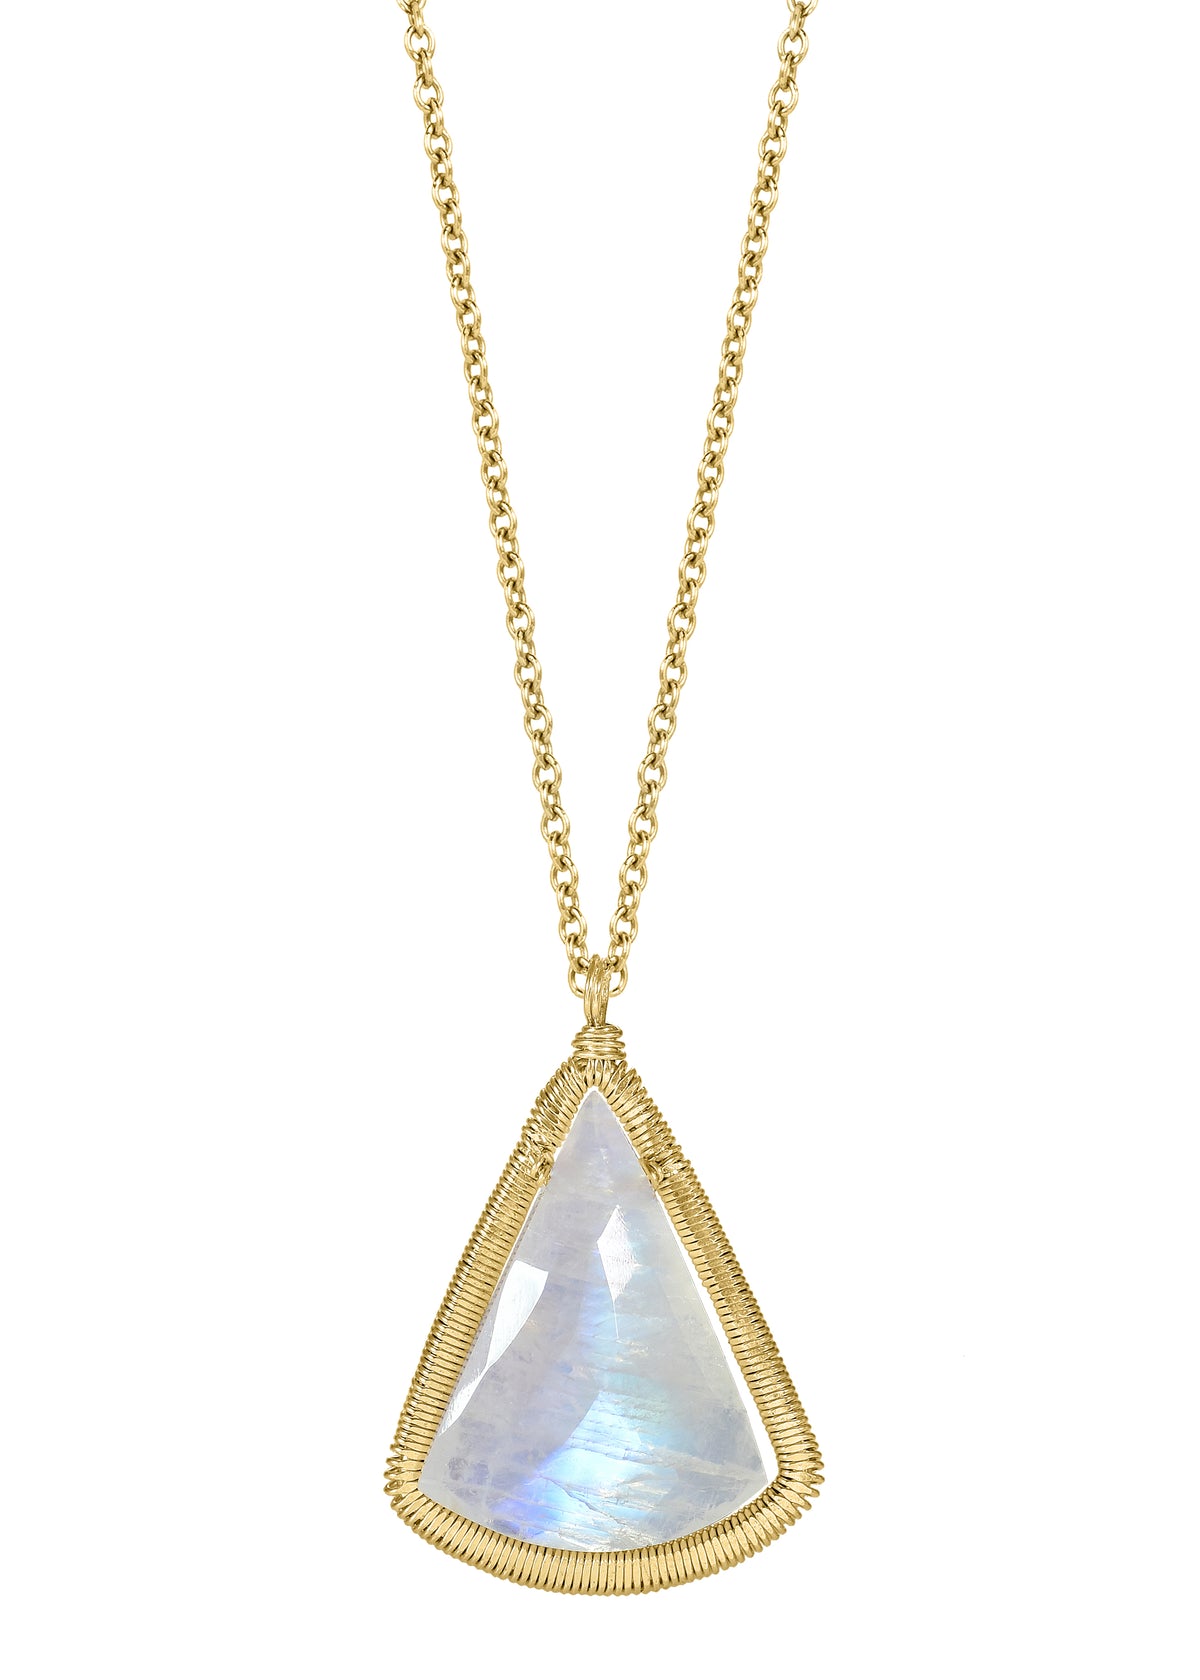 Rainbow moonstone 14k gold fill Necklace measures 17&quot; Pendant measures 13/16&quot; in length and 11/16&quot; in width at the widest point Handmade in our Los Angeles studio